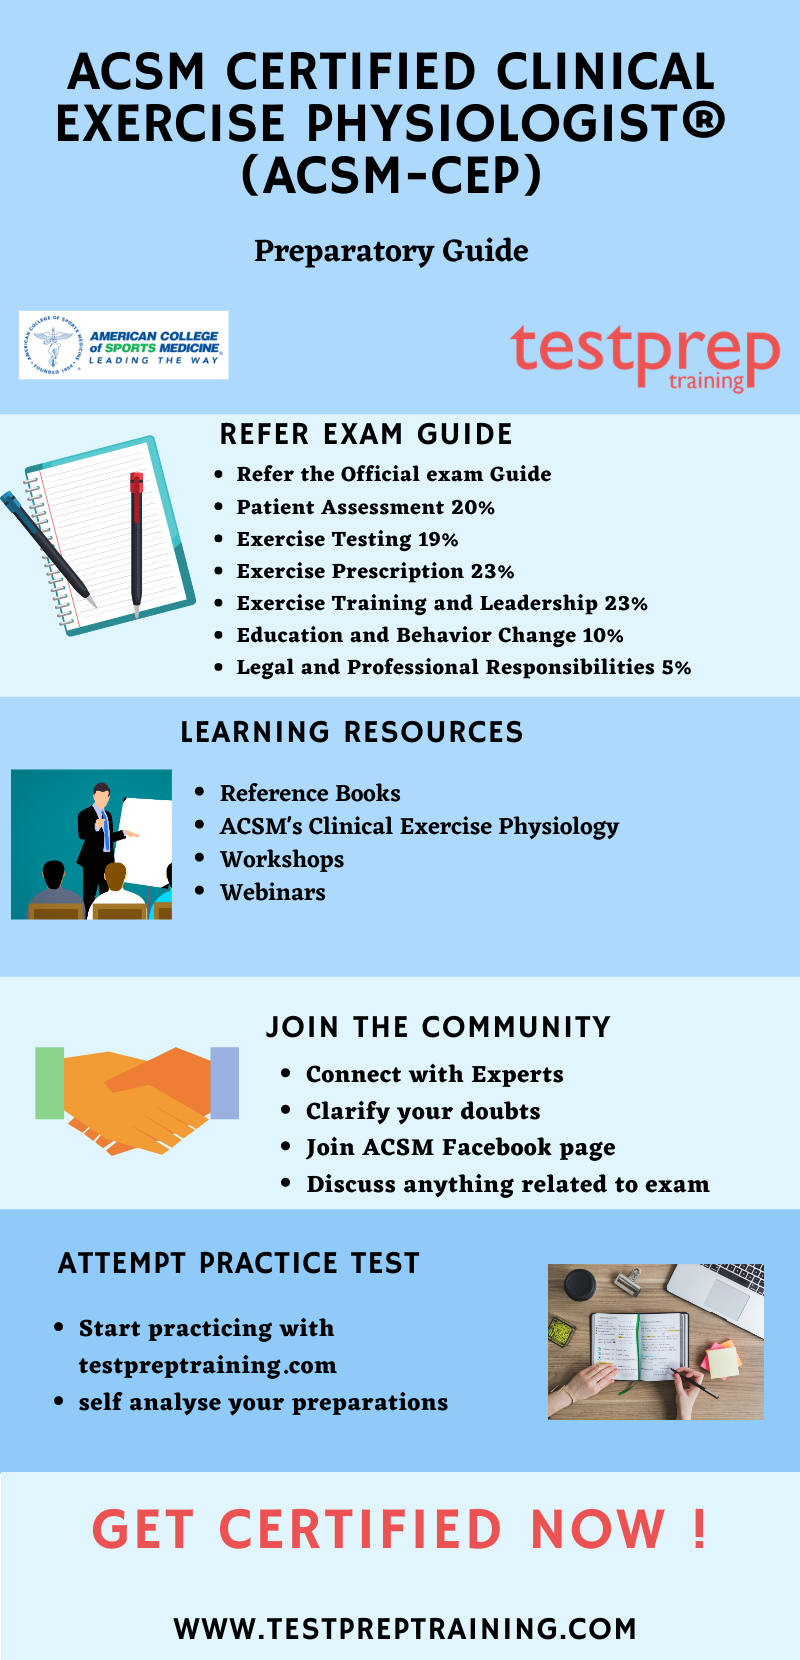 ACSM Certified Clinical Exercise Physiologist® (ACSM-CEP) Preparation Guide